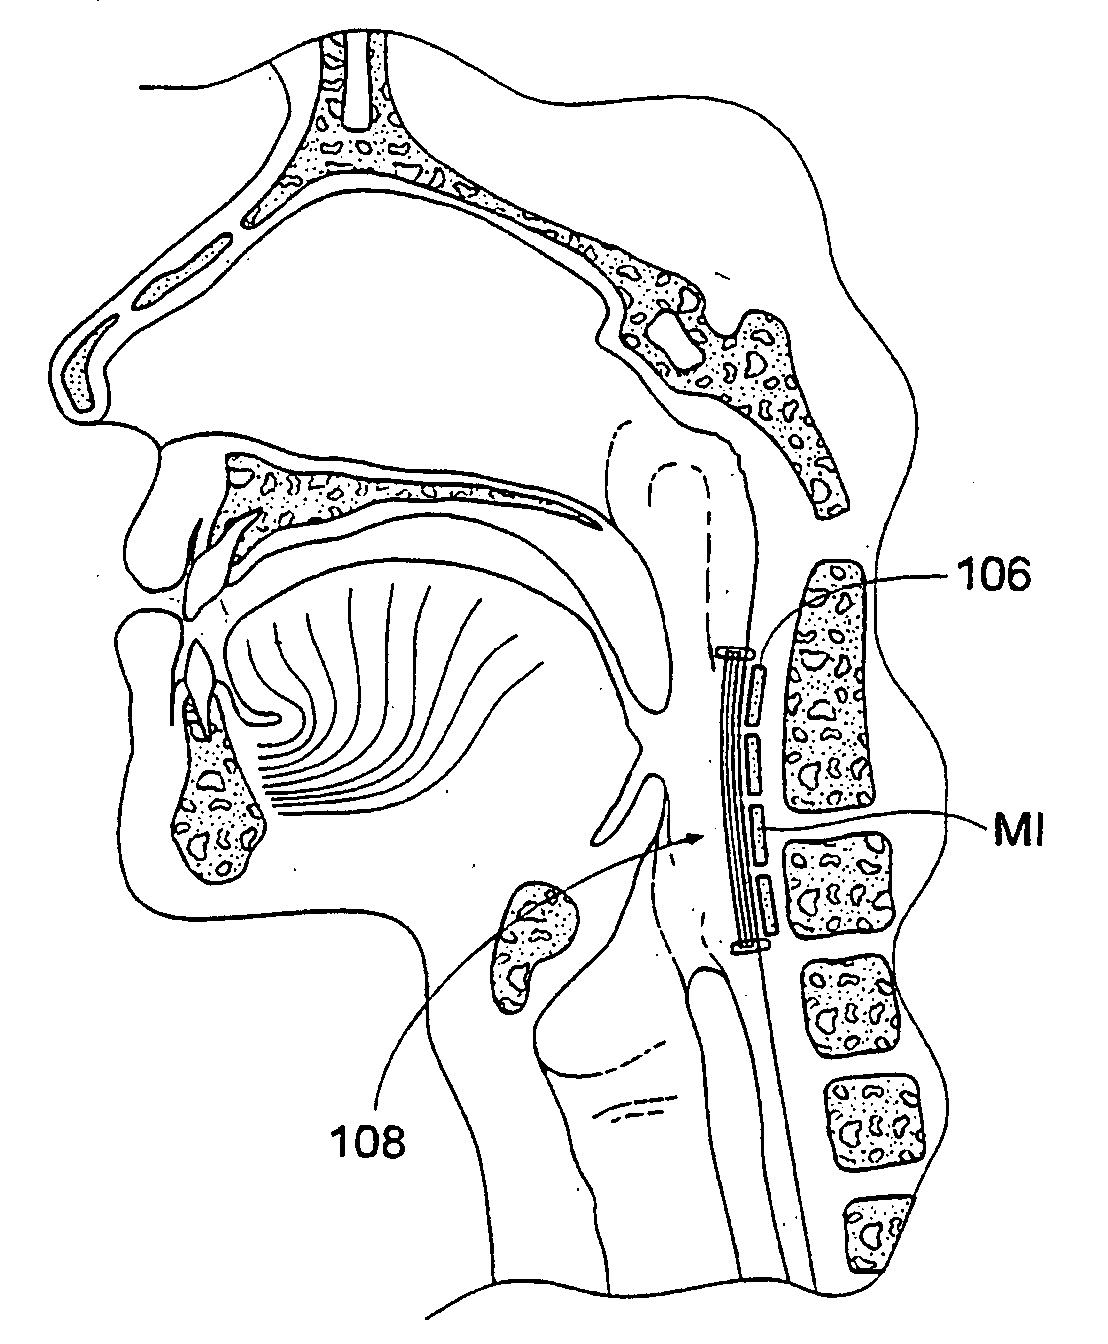 Magnetic force device, systems, and methods for resisting tissue collapse within the pharyngeal conduit